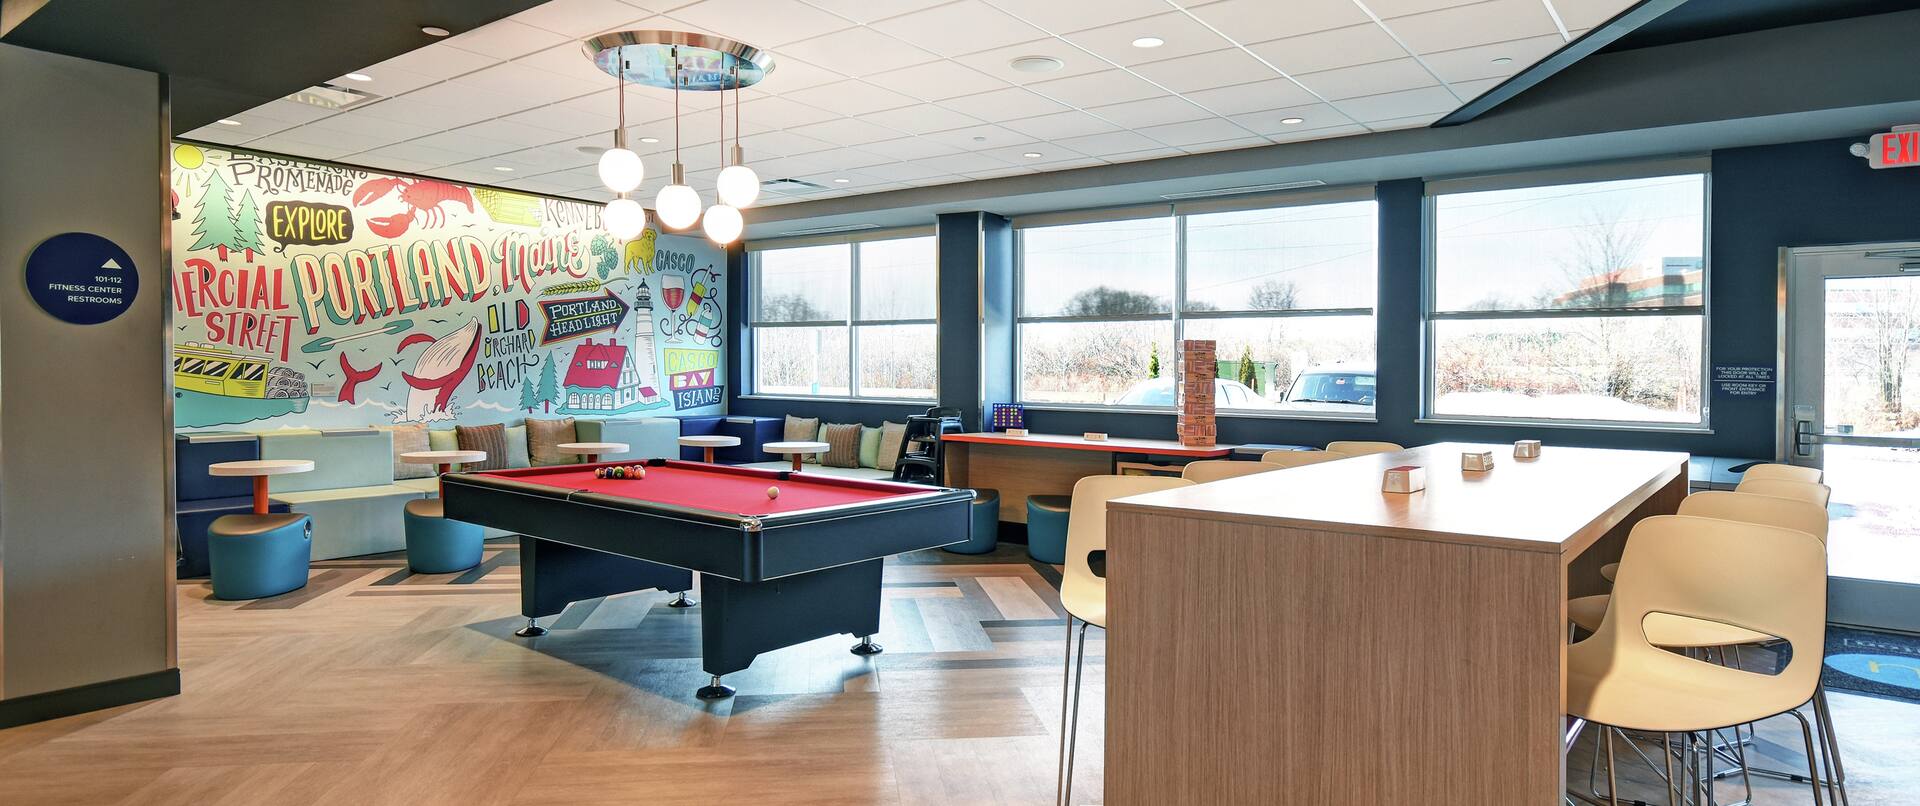 Game Area with Pool Table